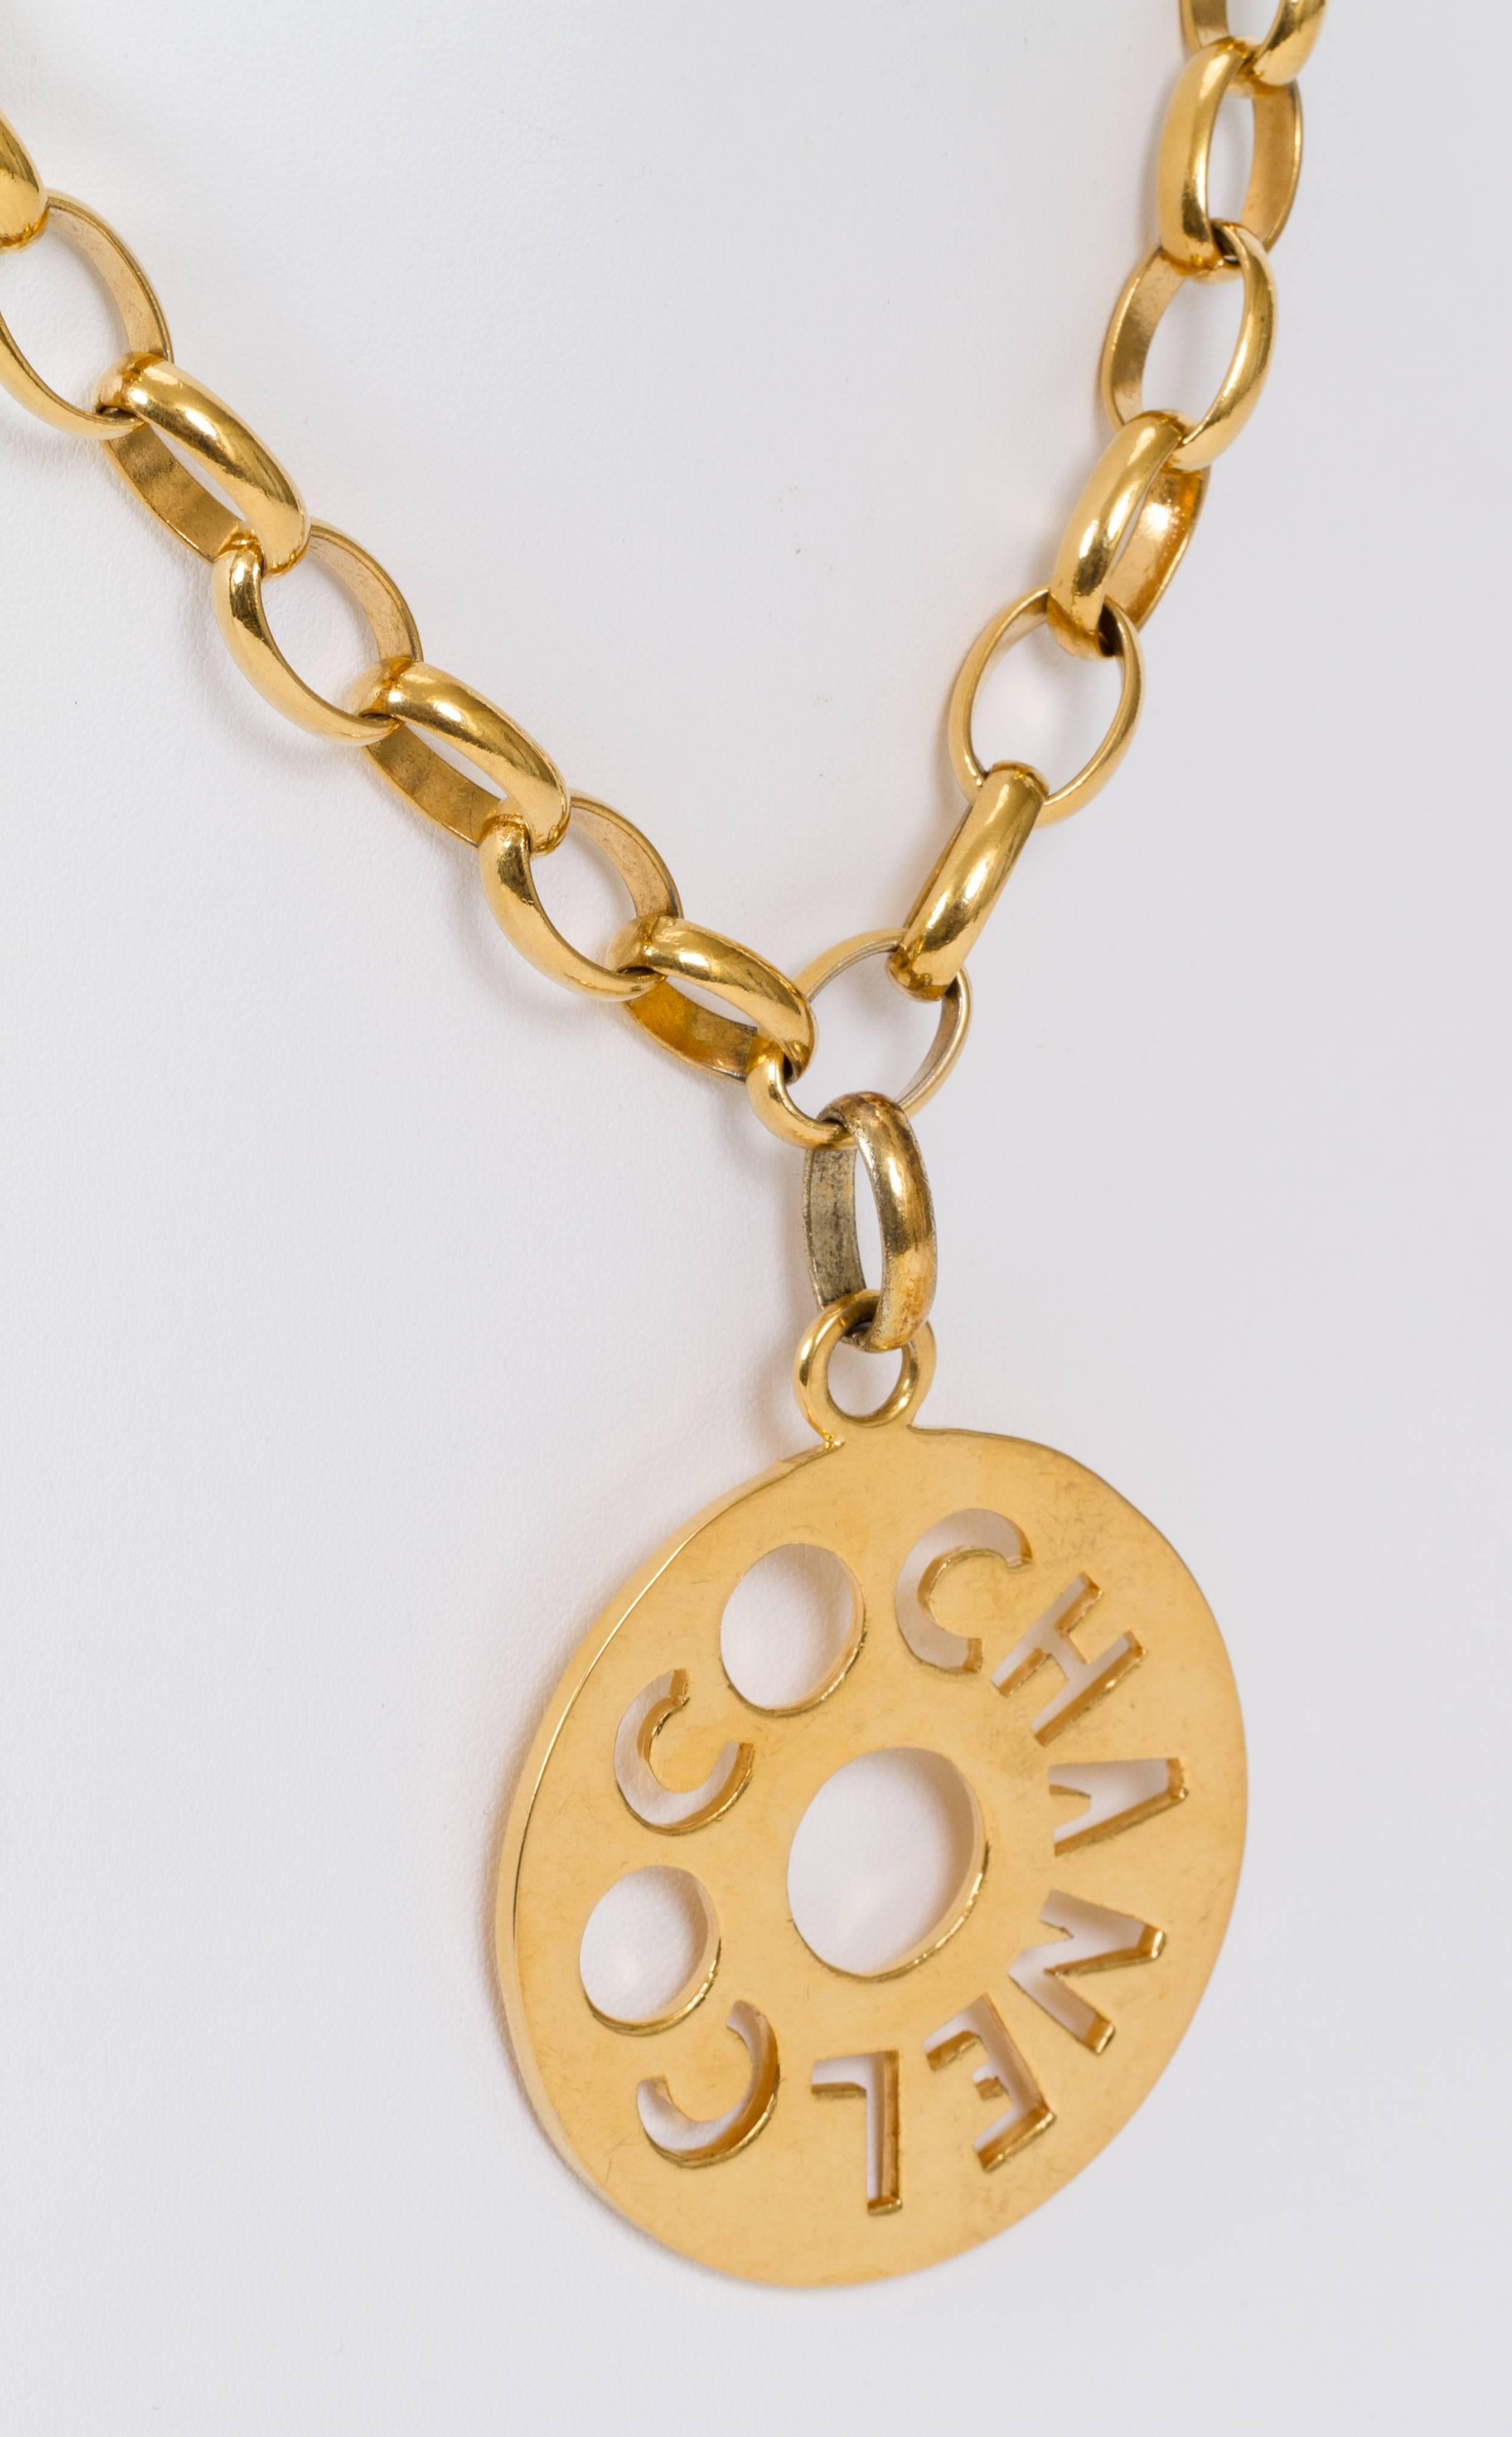 Coco Chanel oversize medallion necklace with round pendant. Comes with original box. Minor wear.